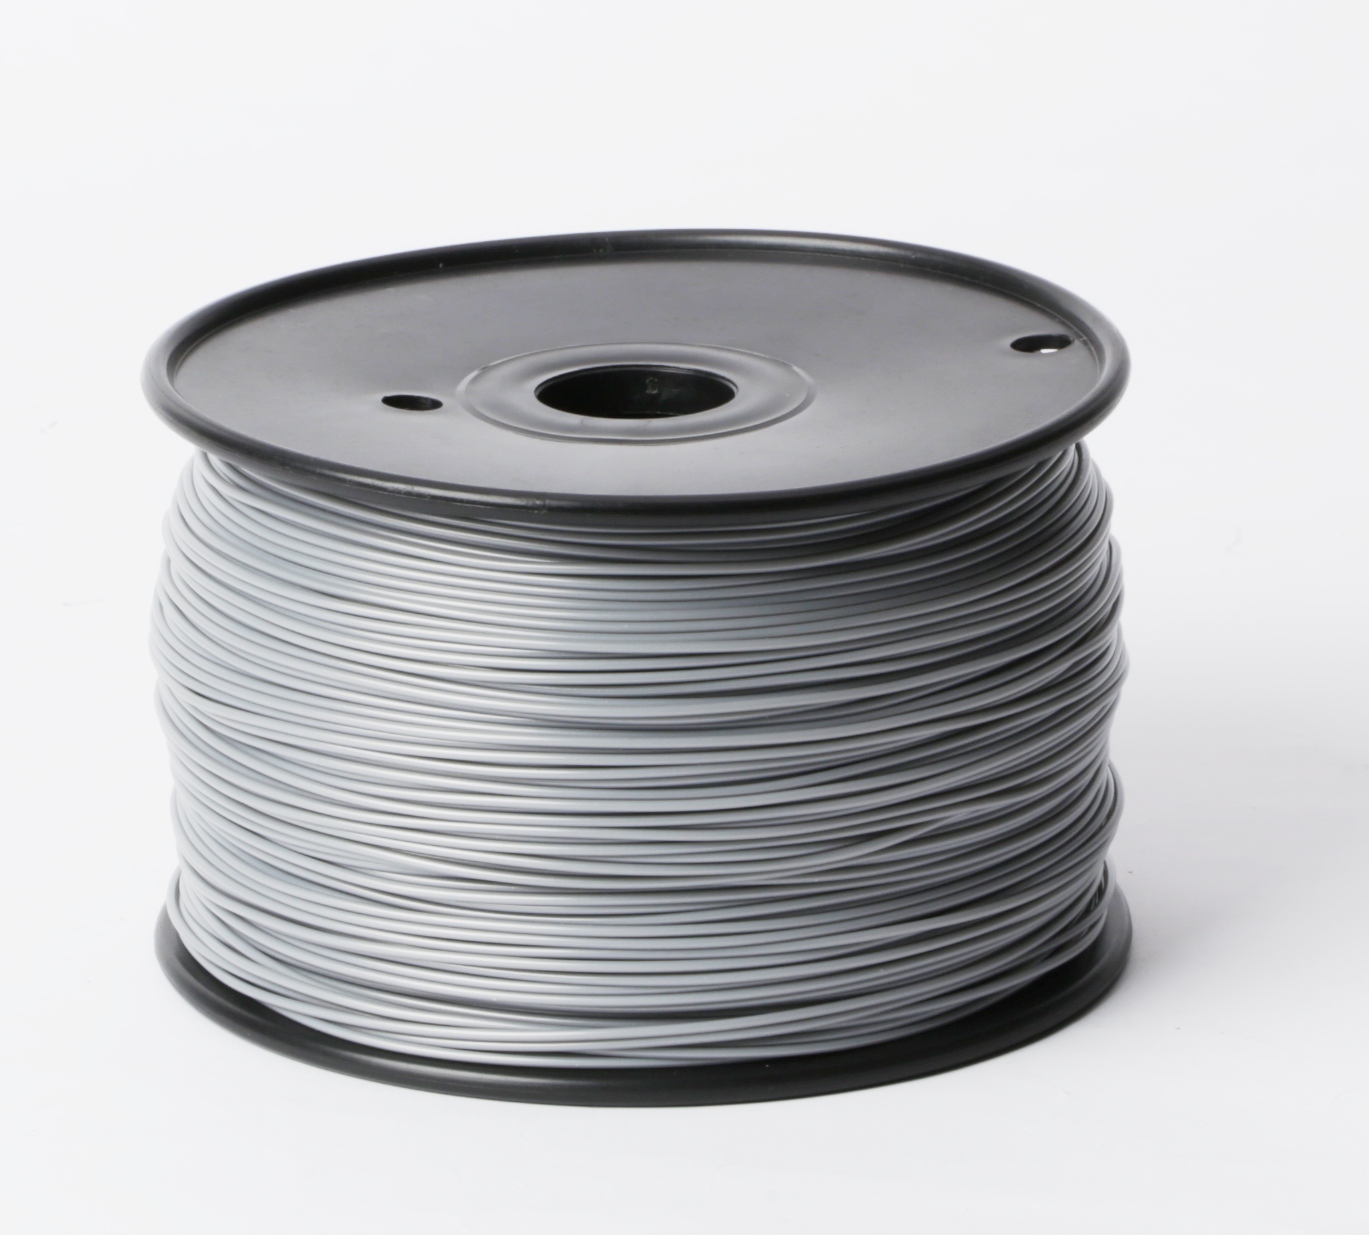 ABS Silver filament 1.75mm 1kg/spool for 3D Printer